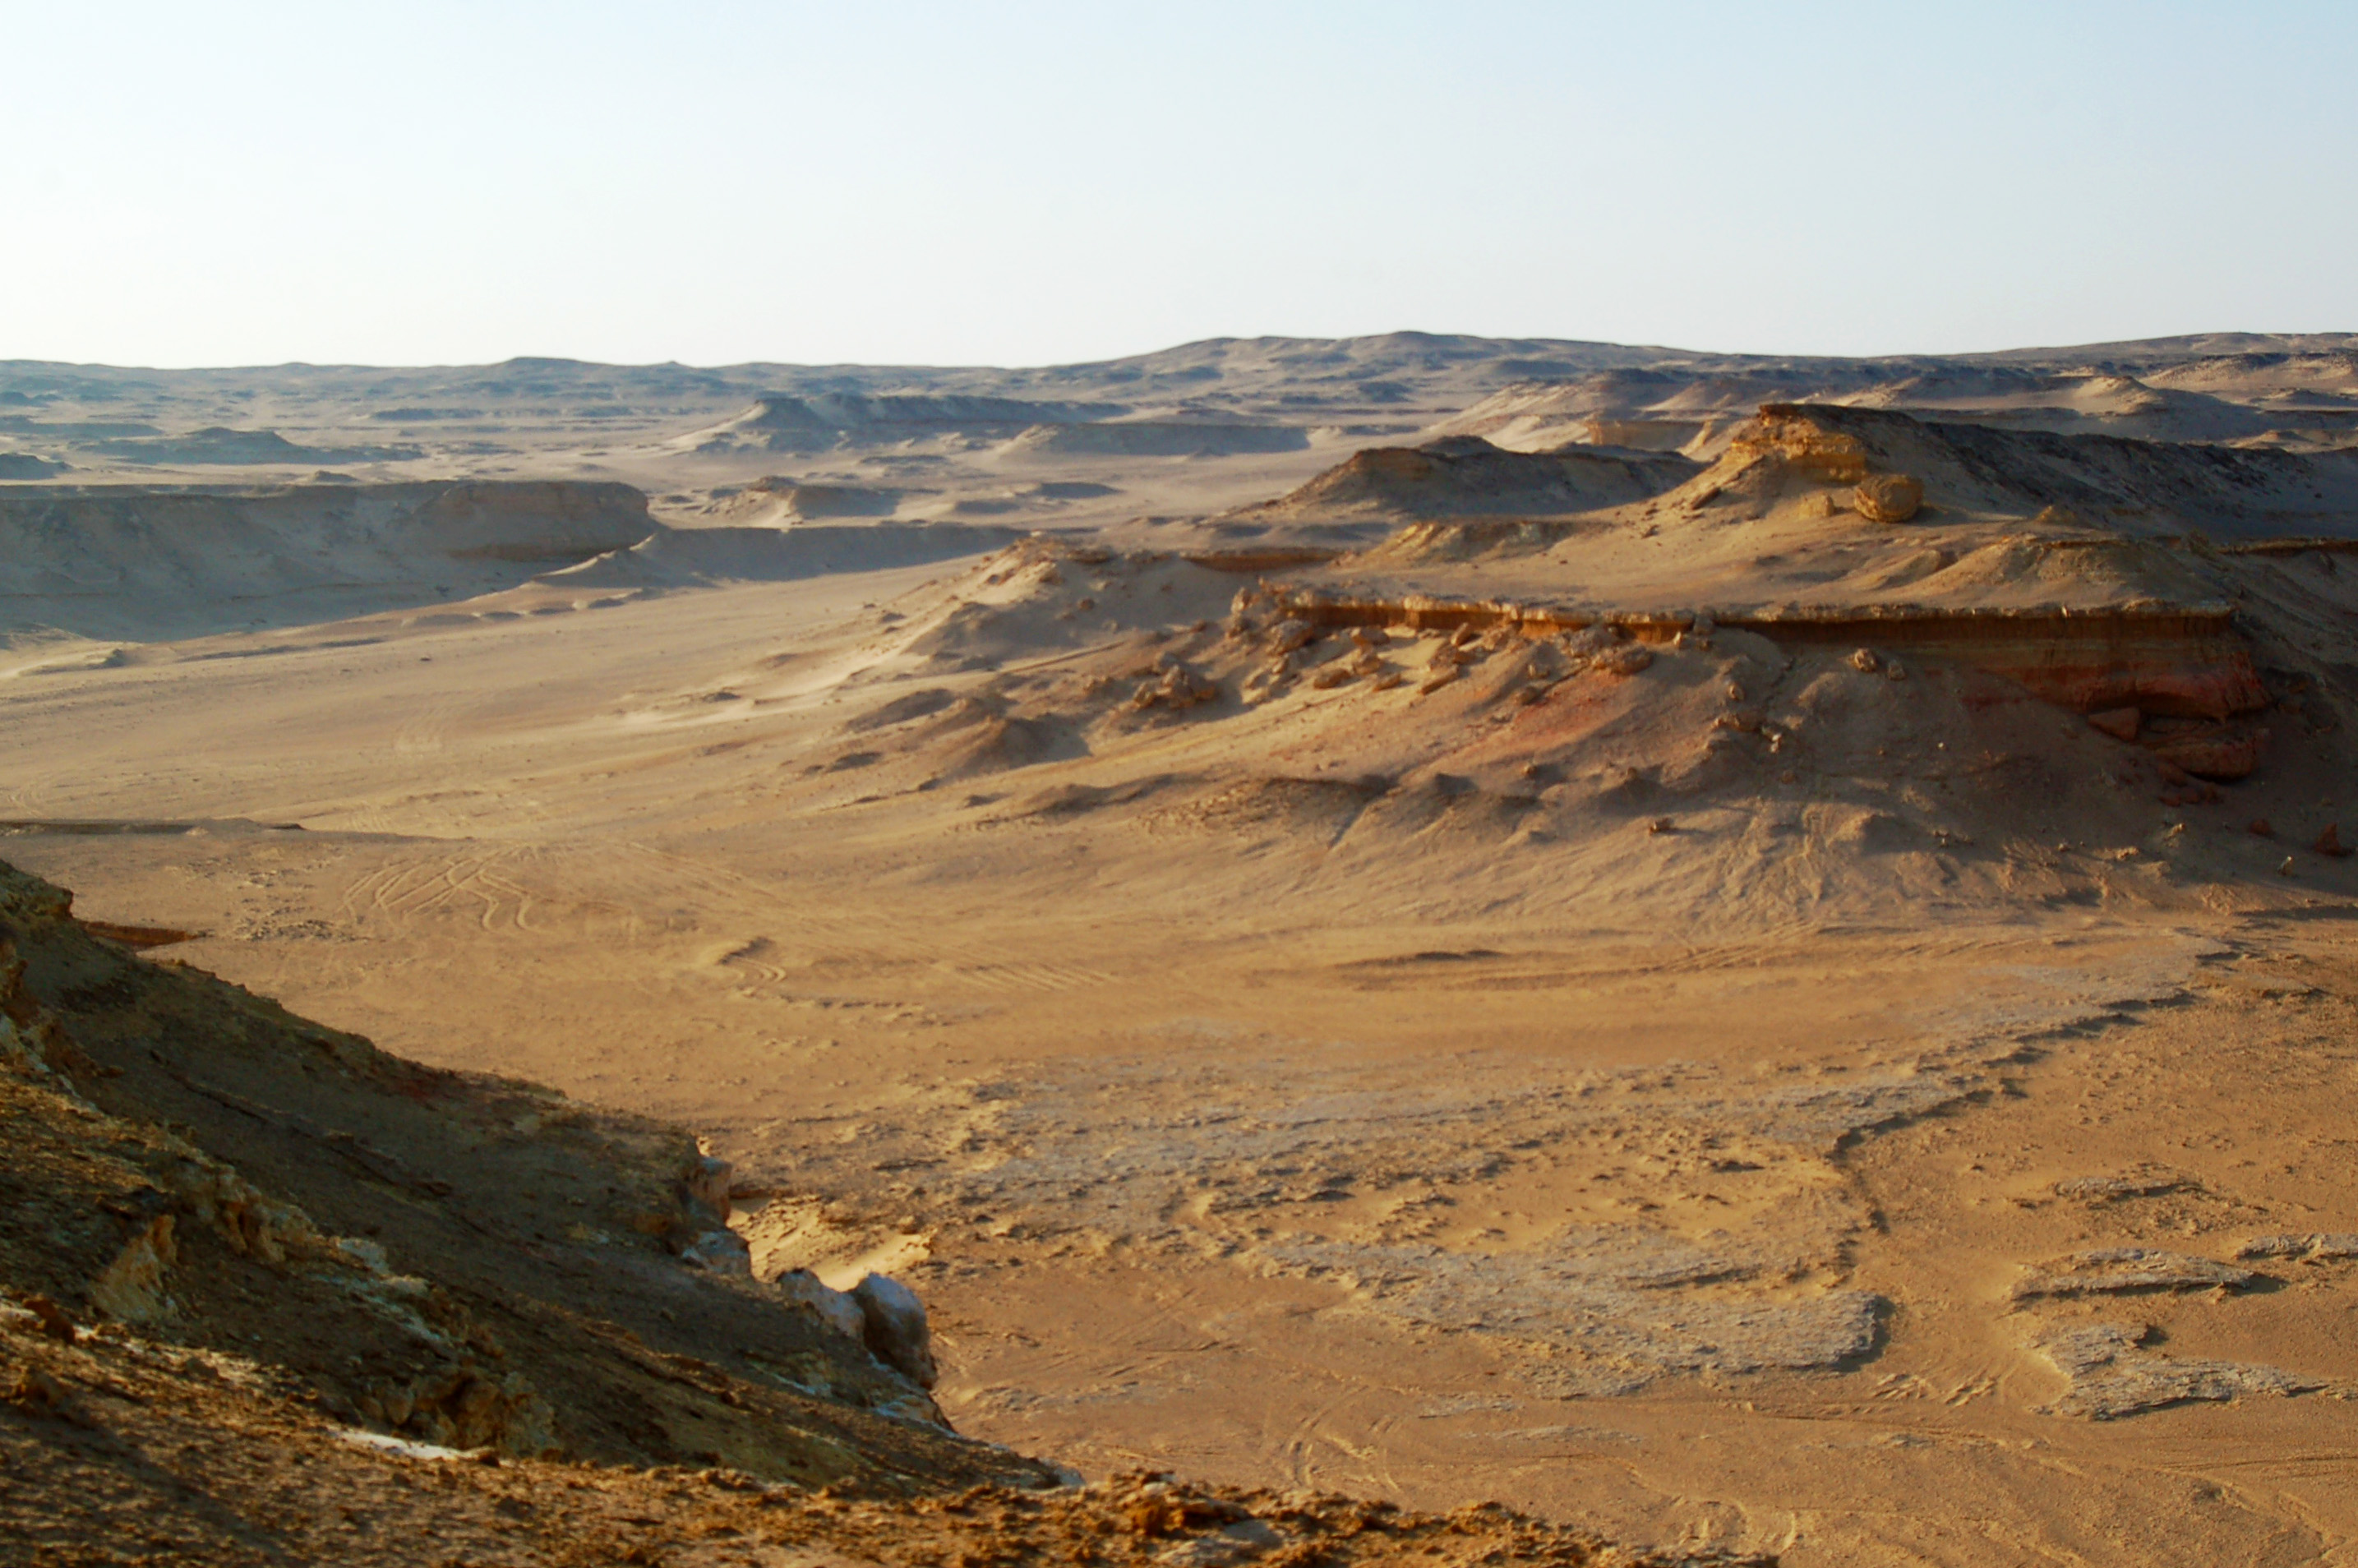 View of the Fayum Depression in Egypt image